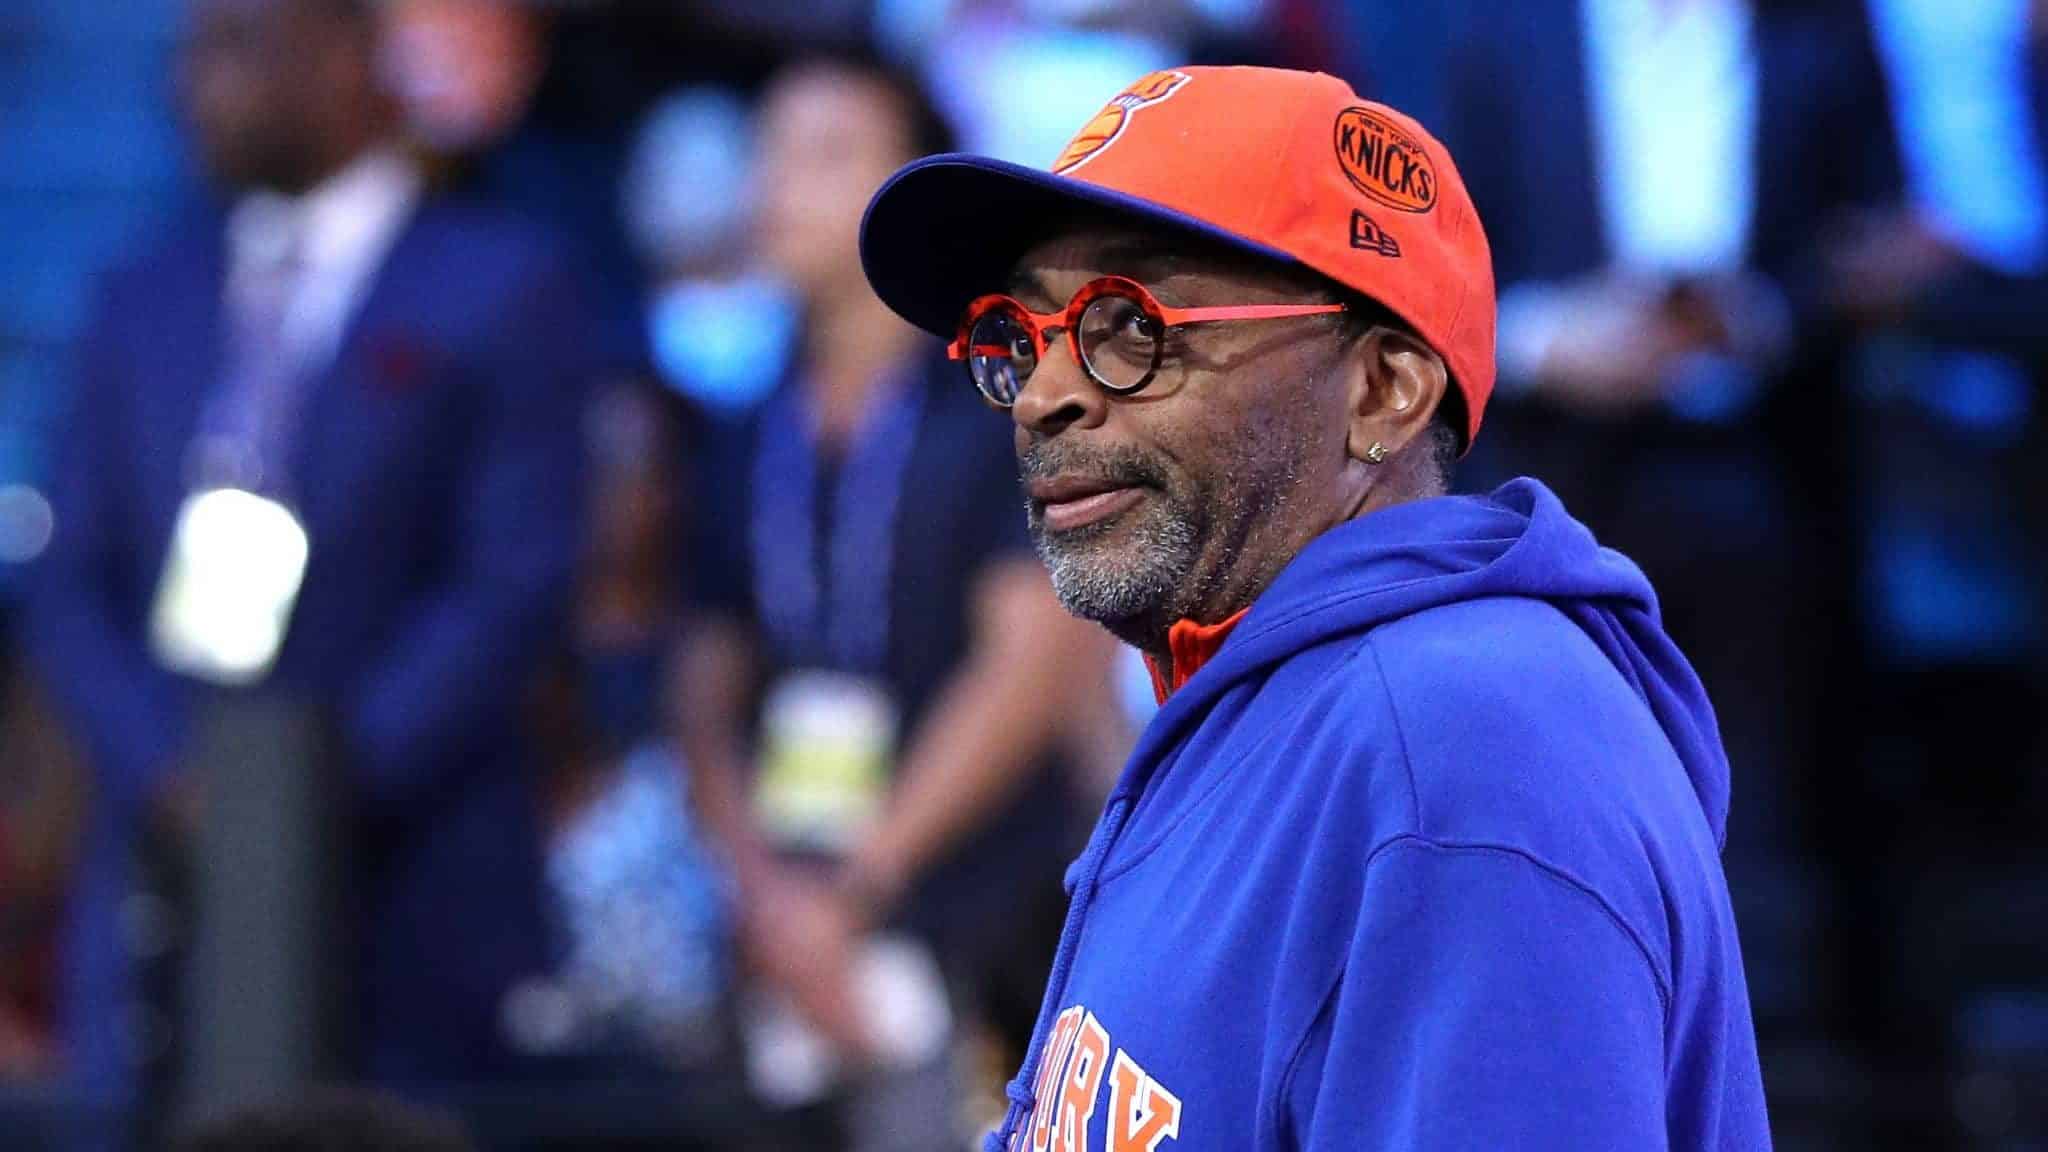 NEW YORK, NEW YORK - JUNE 20: Director and New York Knicks fan Spike Lee looks on before the start of the 2019 NBA Draft at the Barclays Center on June 20, 2019 in the Brooklyn borough of New York City. NOTE TO USER: User expressly acknowledges and agrees that, by downloading and or using this photograph, User is consenting to the terms and conditions of the Getty Images License Agreement.